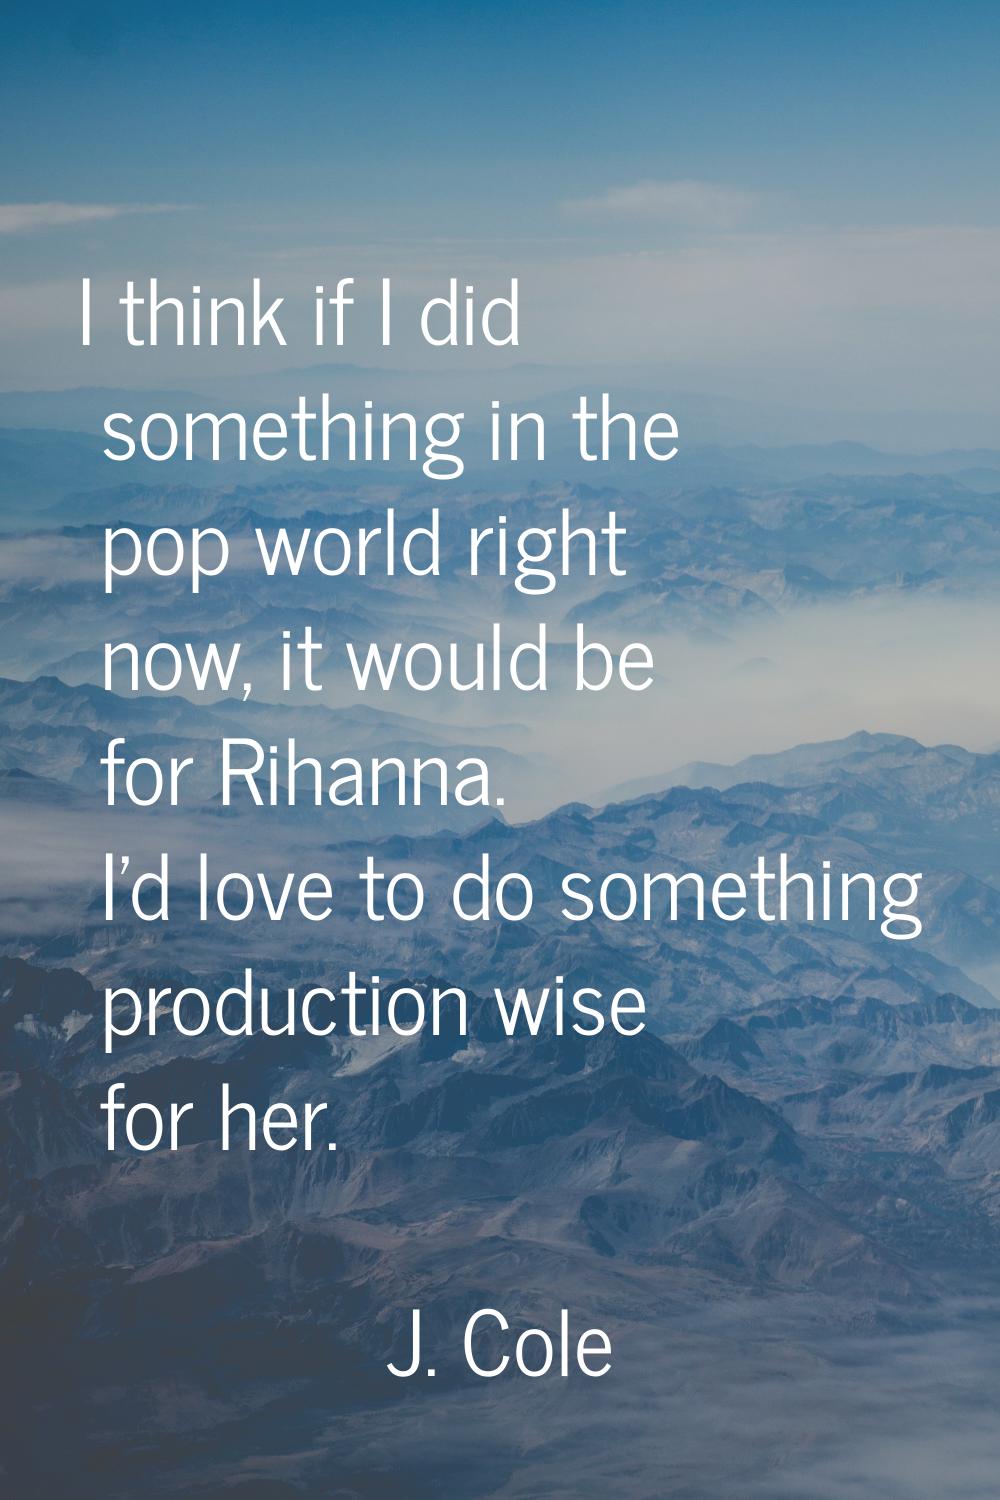 I think if I did something in the pop world right now, it would be for Rihanna. I'd love to do some